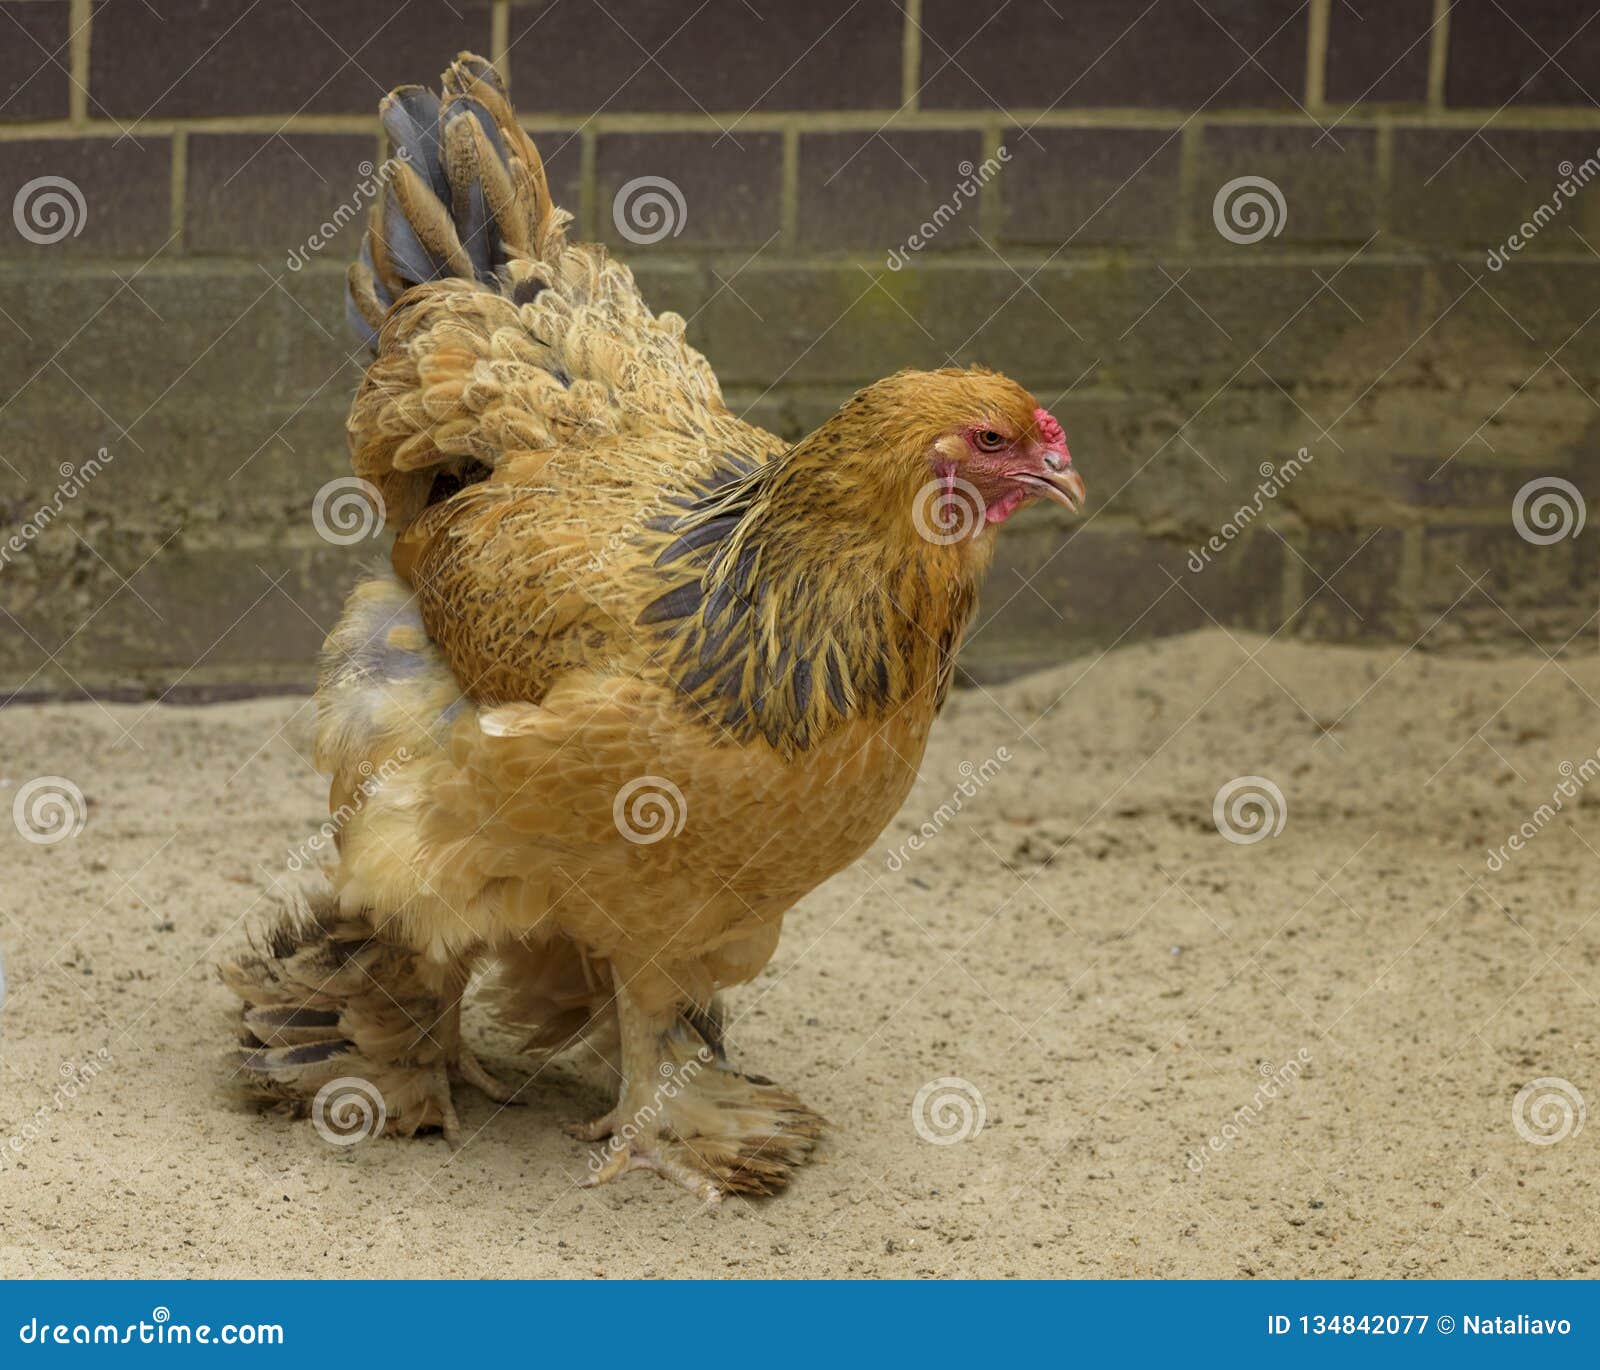 Buff Brahma Chicken with the Excessive Multi-colored Plumage that